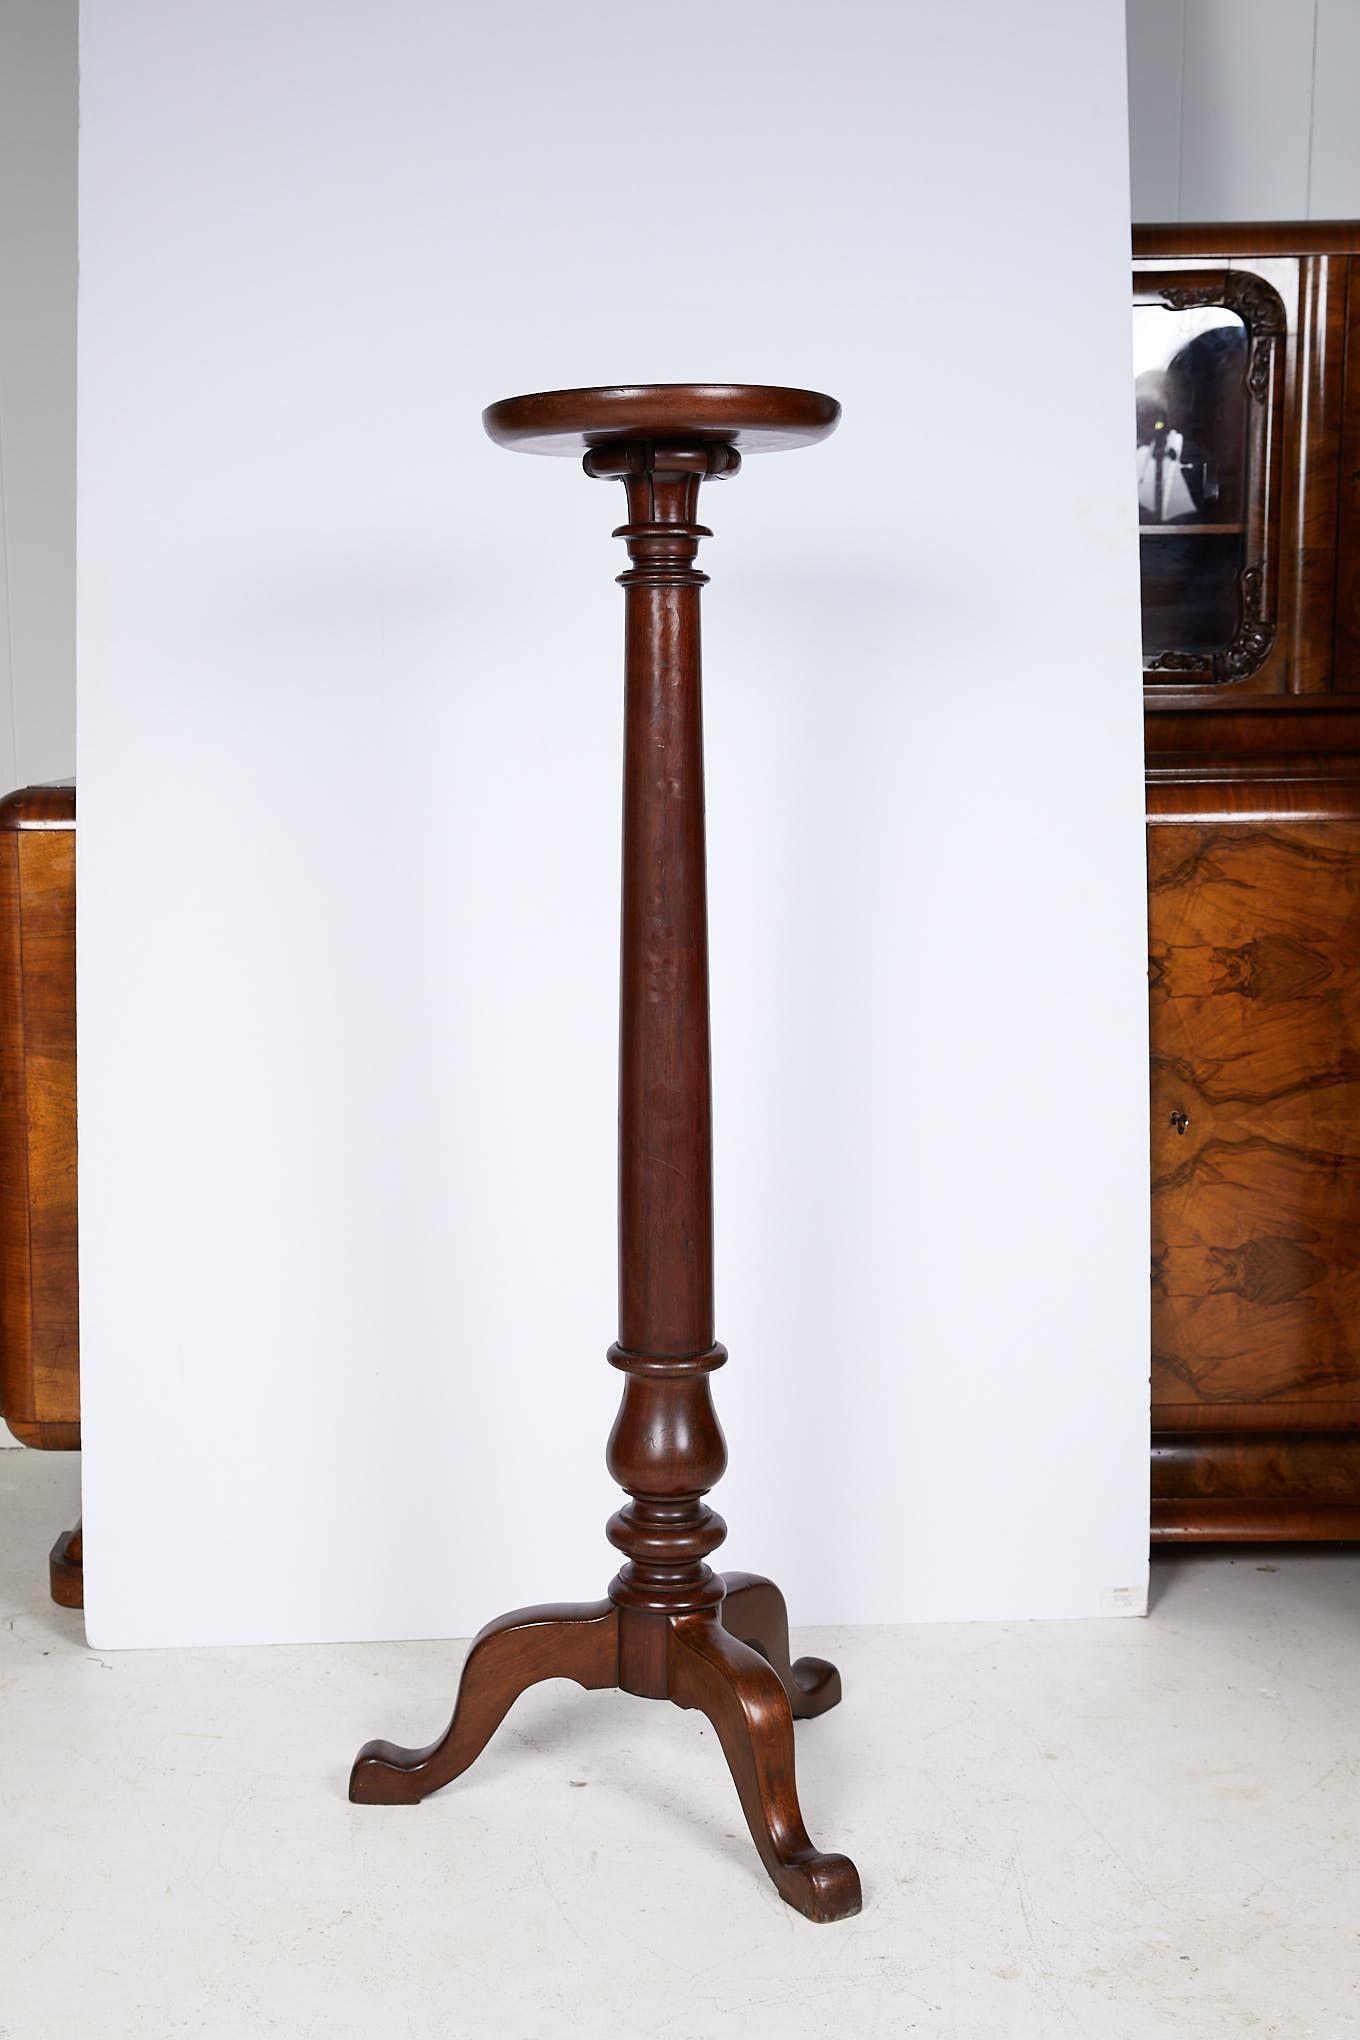 Early 20th century English Georgian style mahogany torchere or plant stand with a molded dish top supported by a tall carved and turned tapering column, raised on three shaped cabriole legs. 

The stand measures 52.75